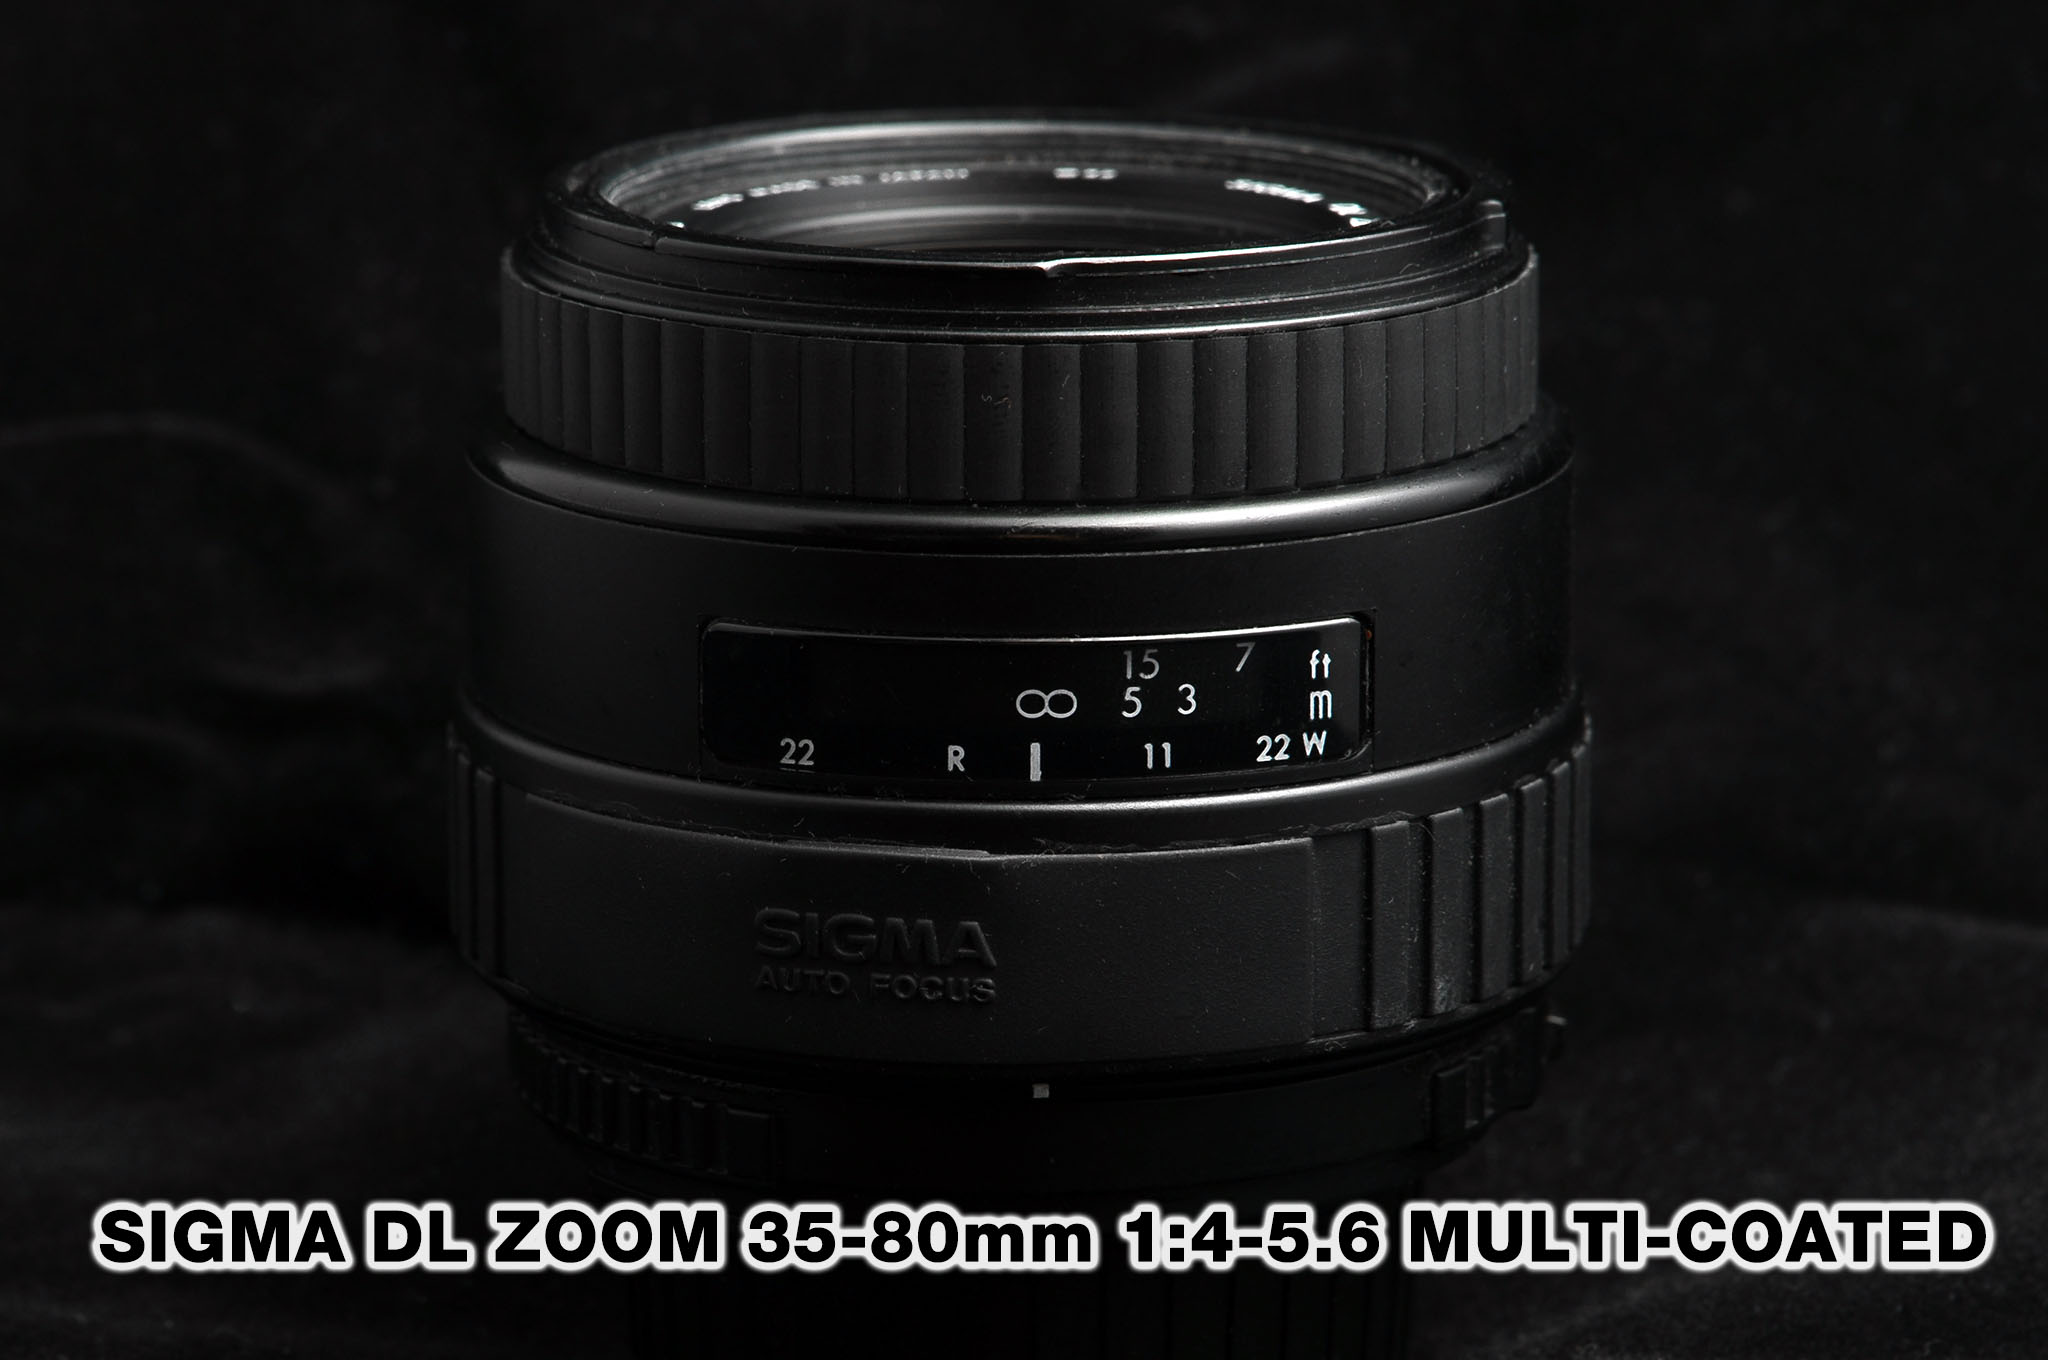 SIGMA DL ZOOM 35-80mm 1:4-5.6 MULTI-COATED